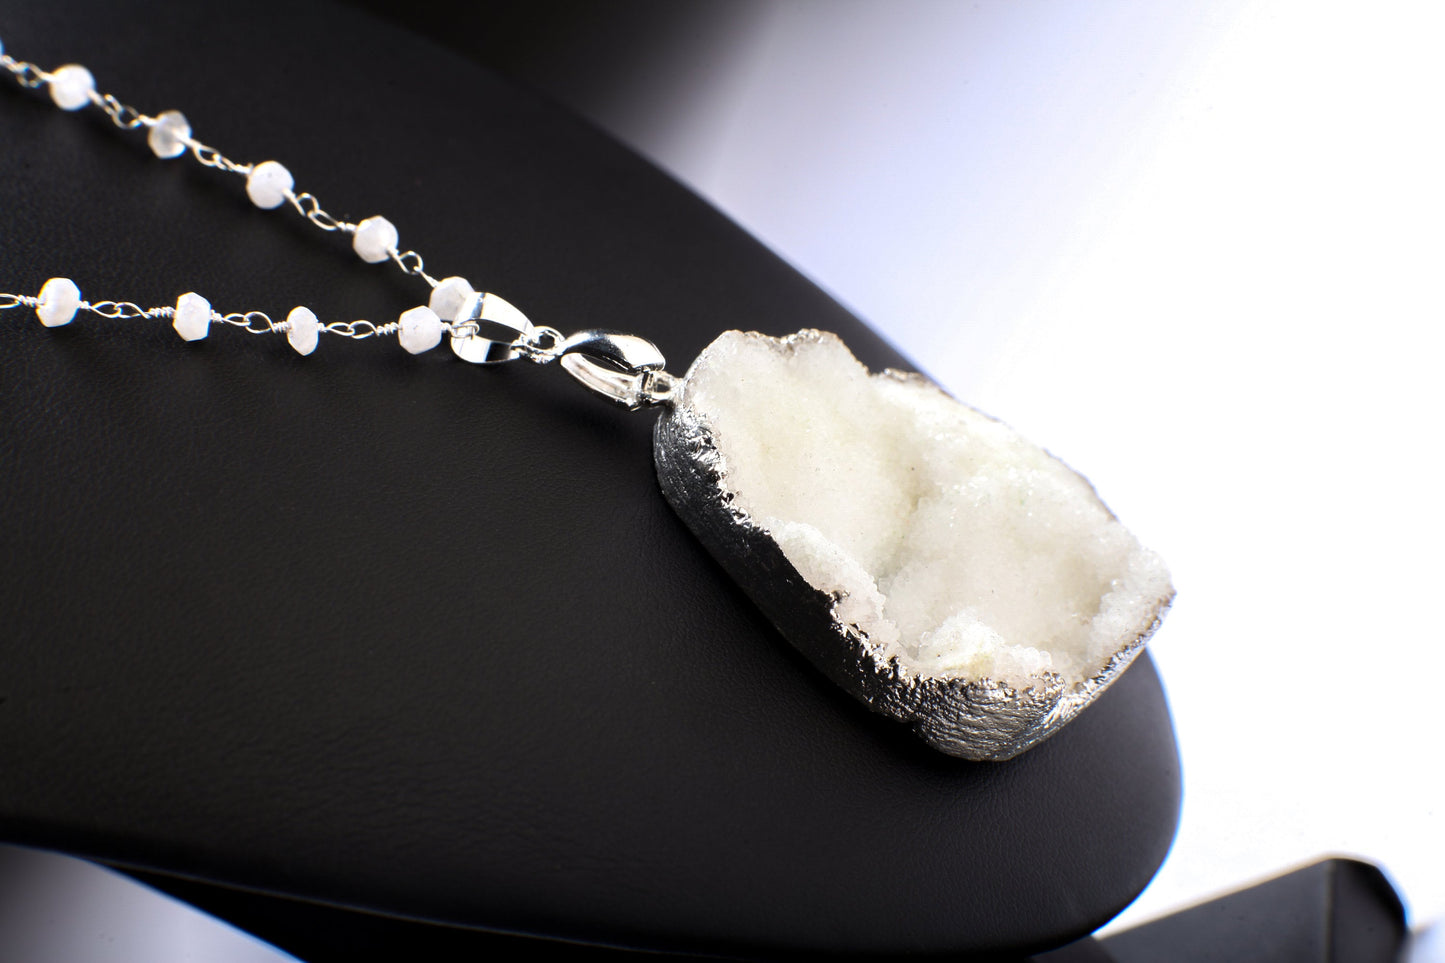 White Druzy Agate Geode Pendant Necklace, Earrings Set, Sparkling Druzy Earrings, Pendant Moonstone Rosary Chain in Sterling Silver Clasp